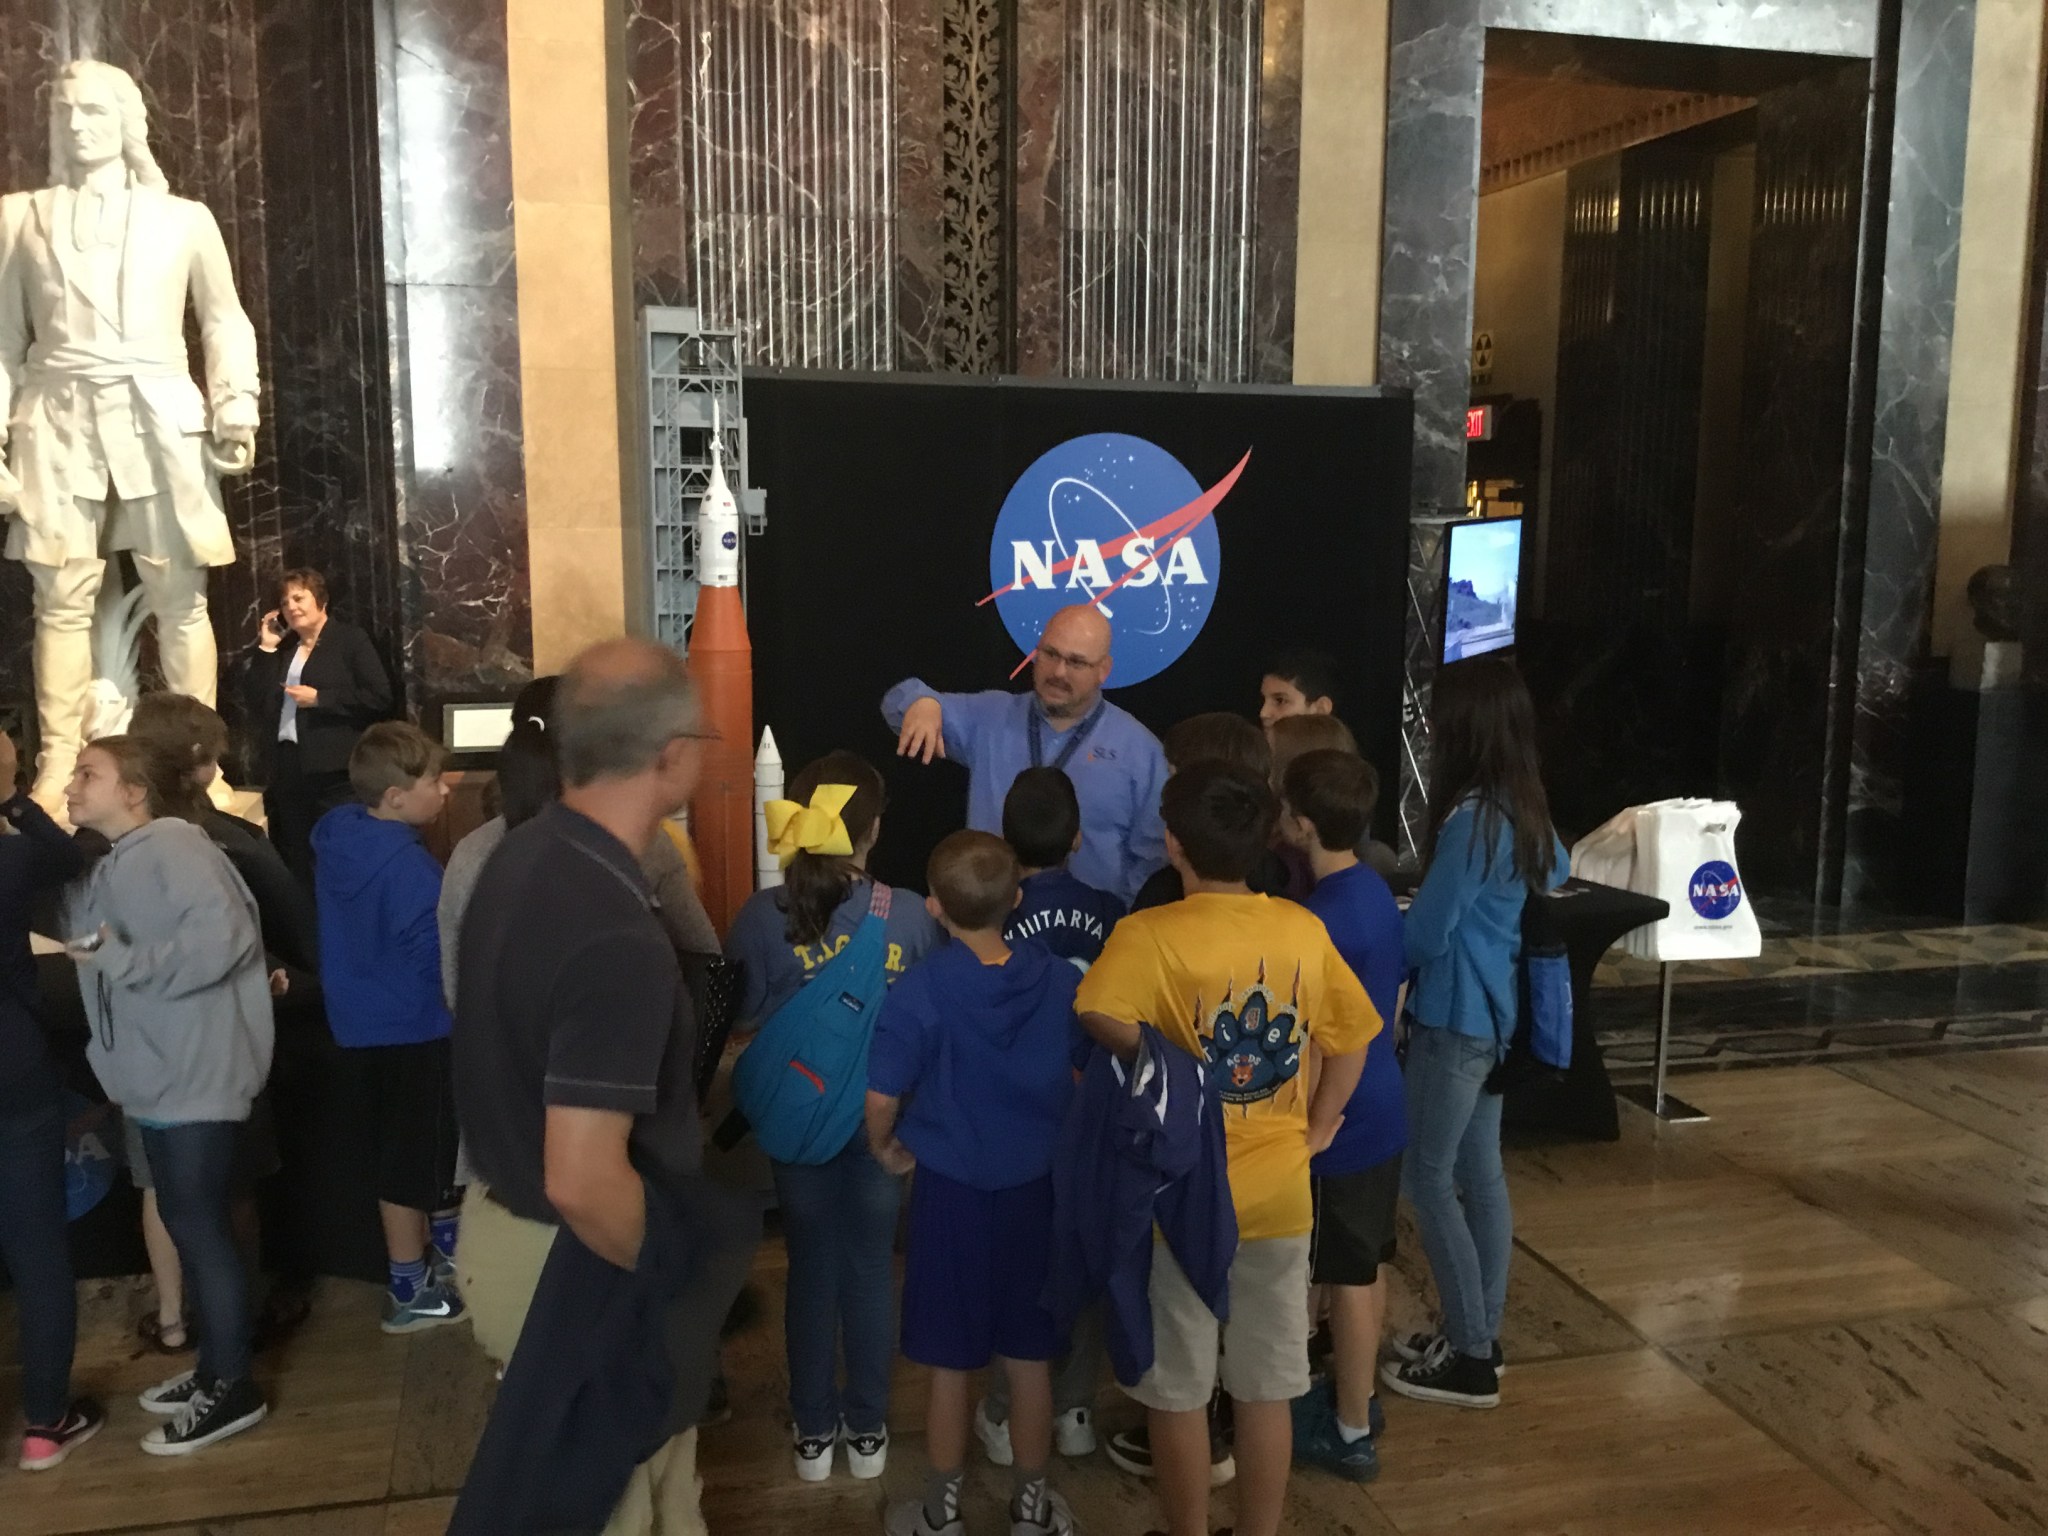 NASA’s Marshall Space Flight Center celebrated NASA Day in Baton Rouge at the Louisiana State Capitol on May 4. 